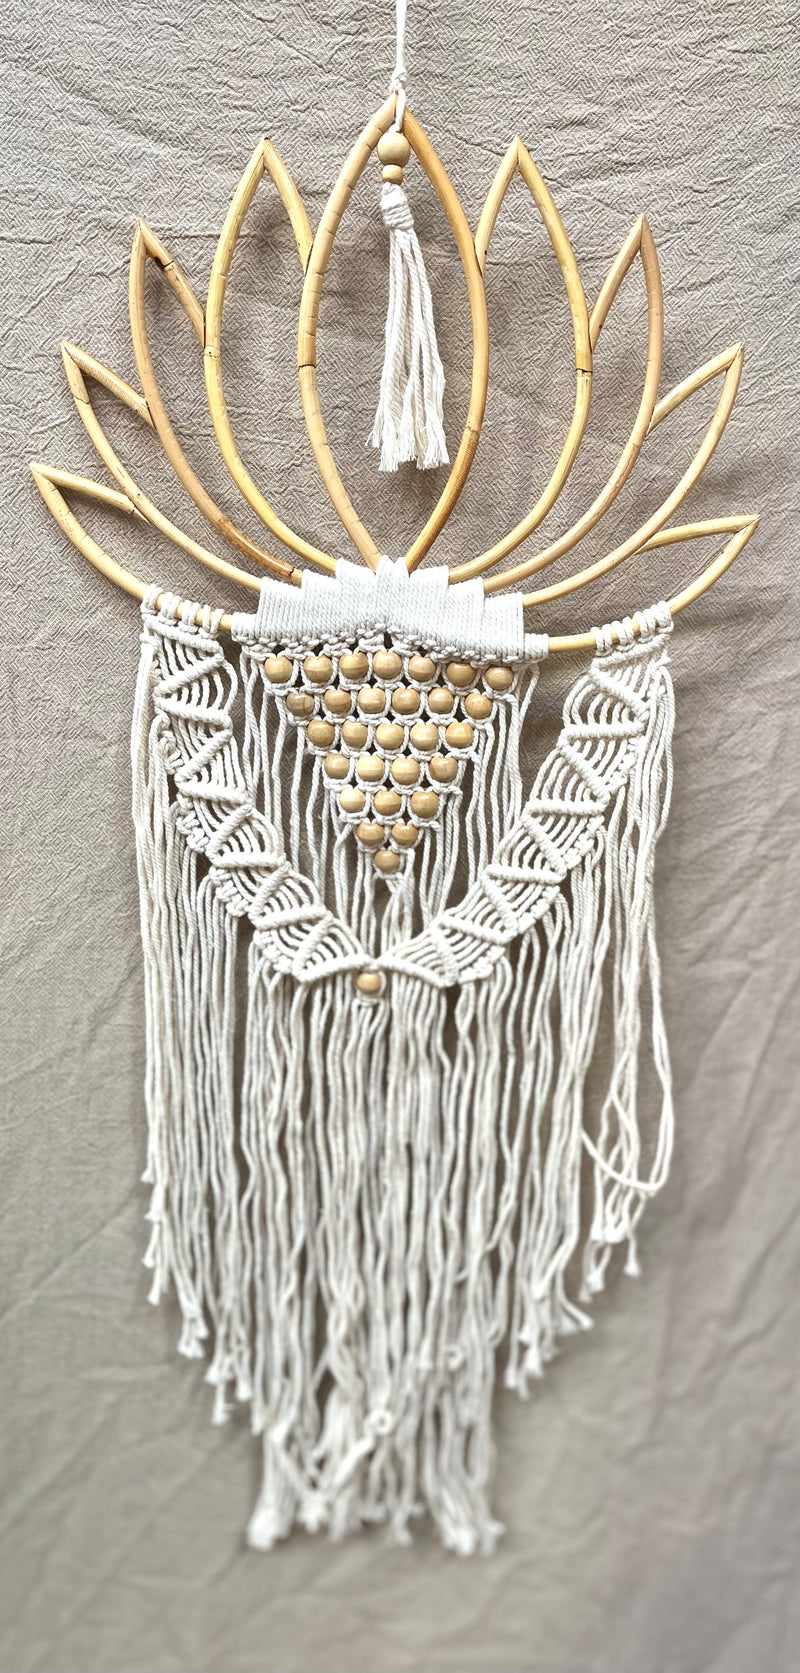 Lotus wall hanging / dream catcher with macrame and beads